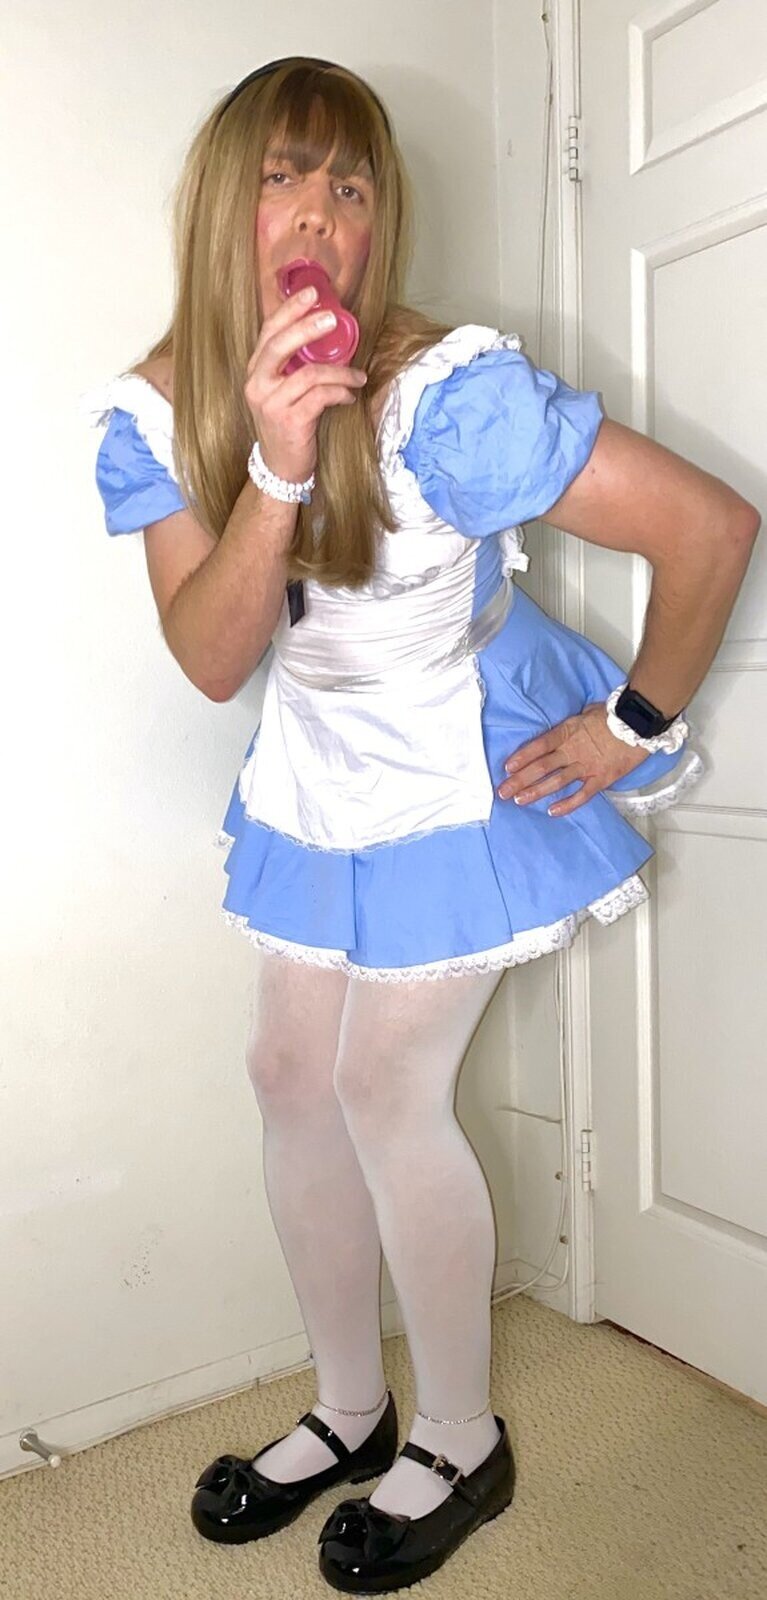 Thinking about cock while dressing like a sissy